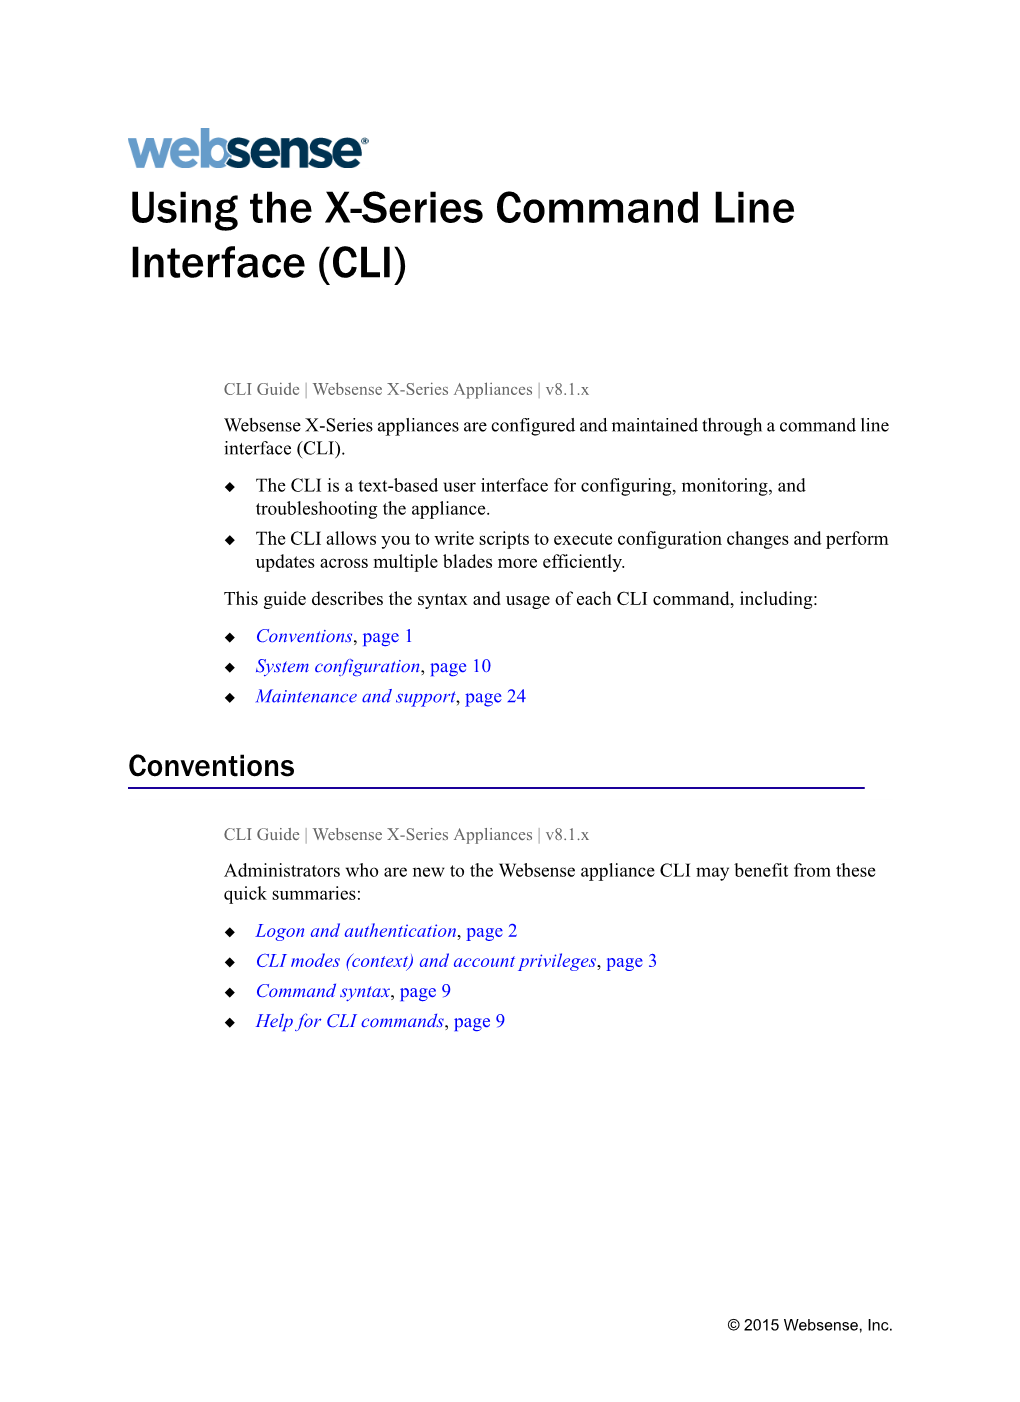 X-Series Command Line Interface Guide Version 8.1.0